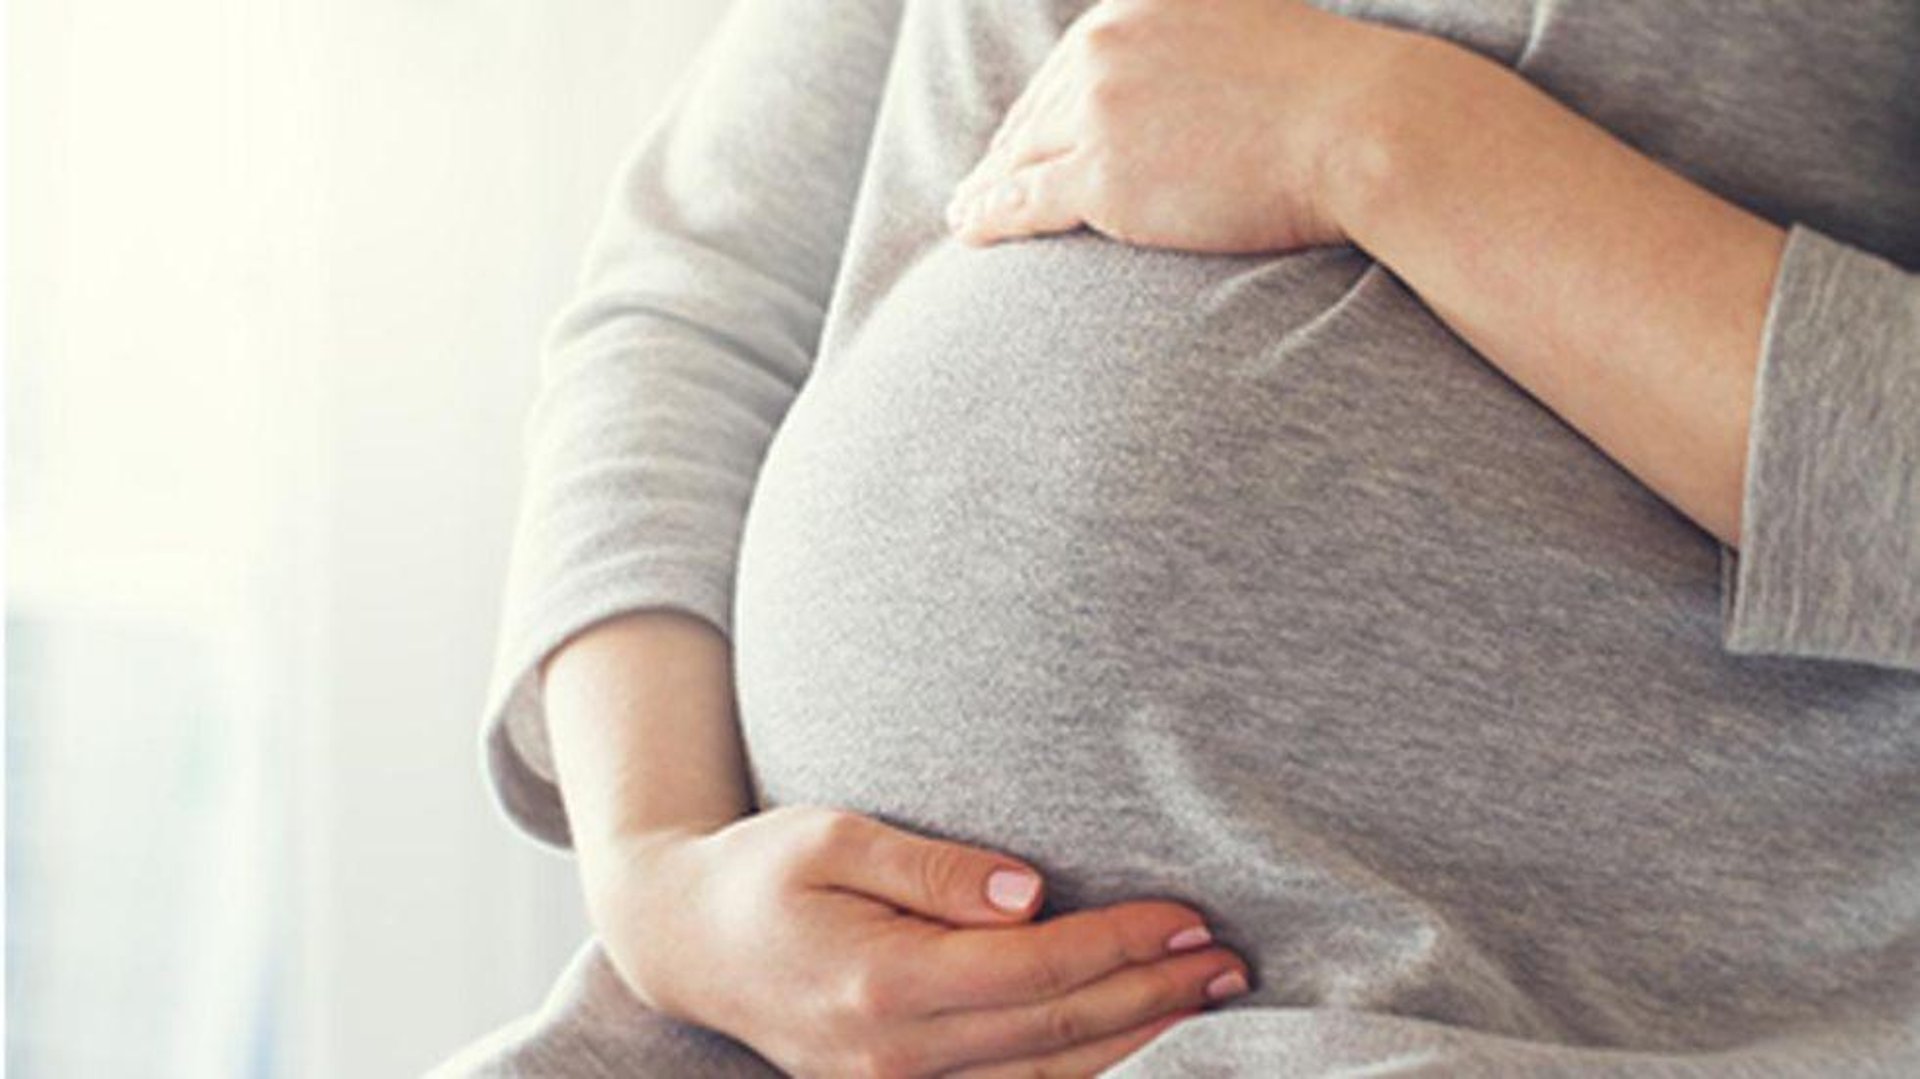  Dirty Air in Pregnancy Might Raise Baby's Obesity Risk